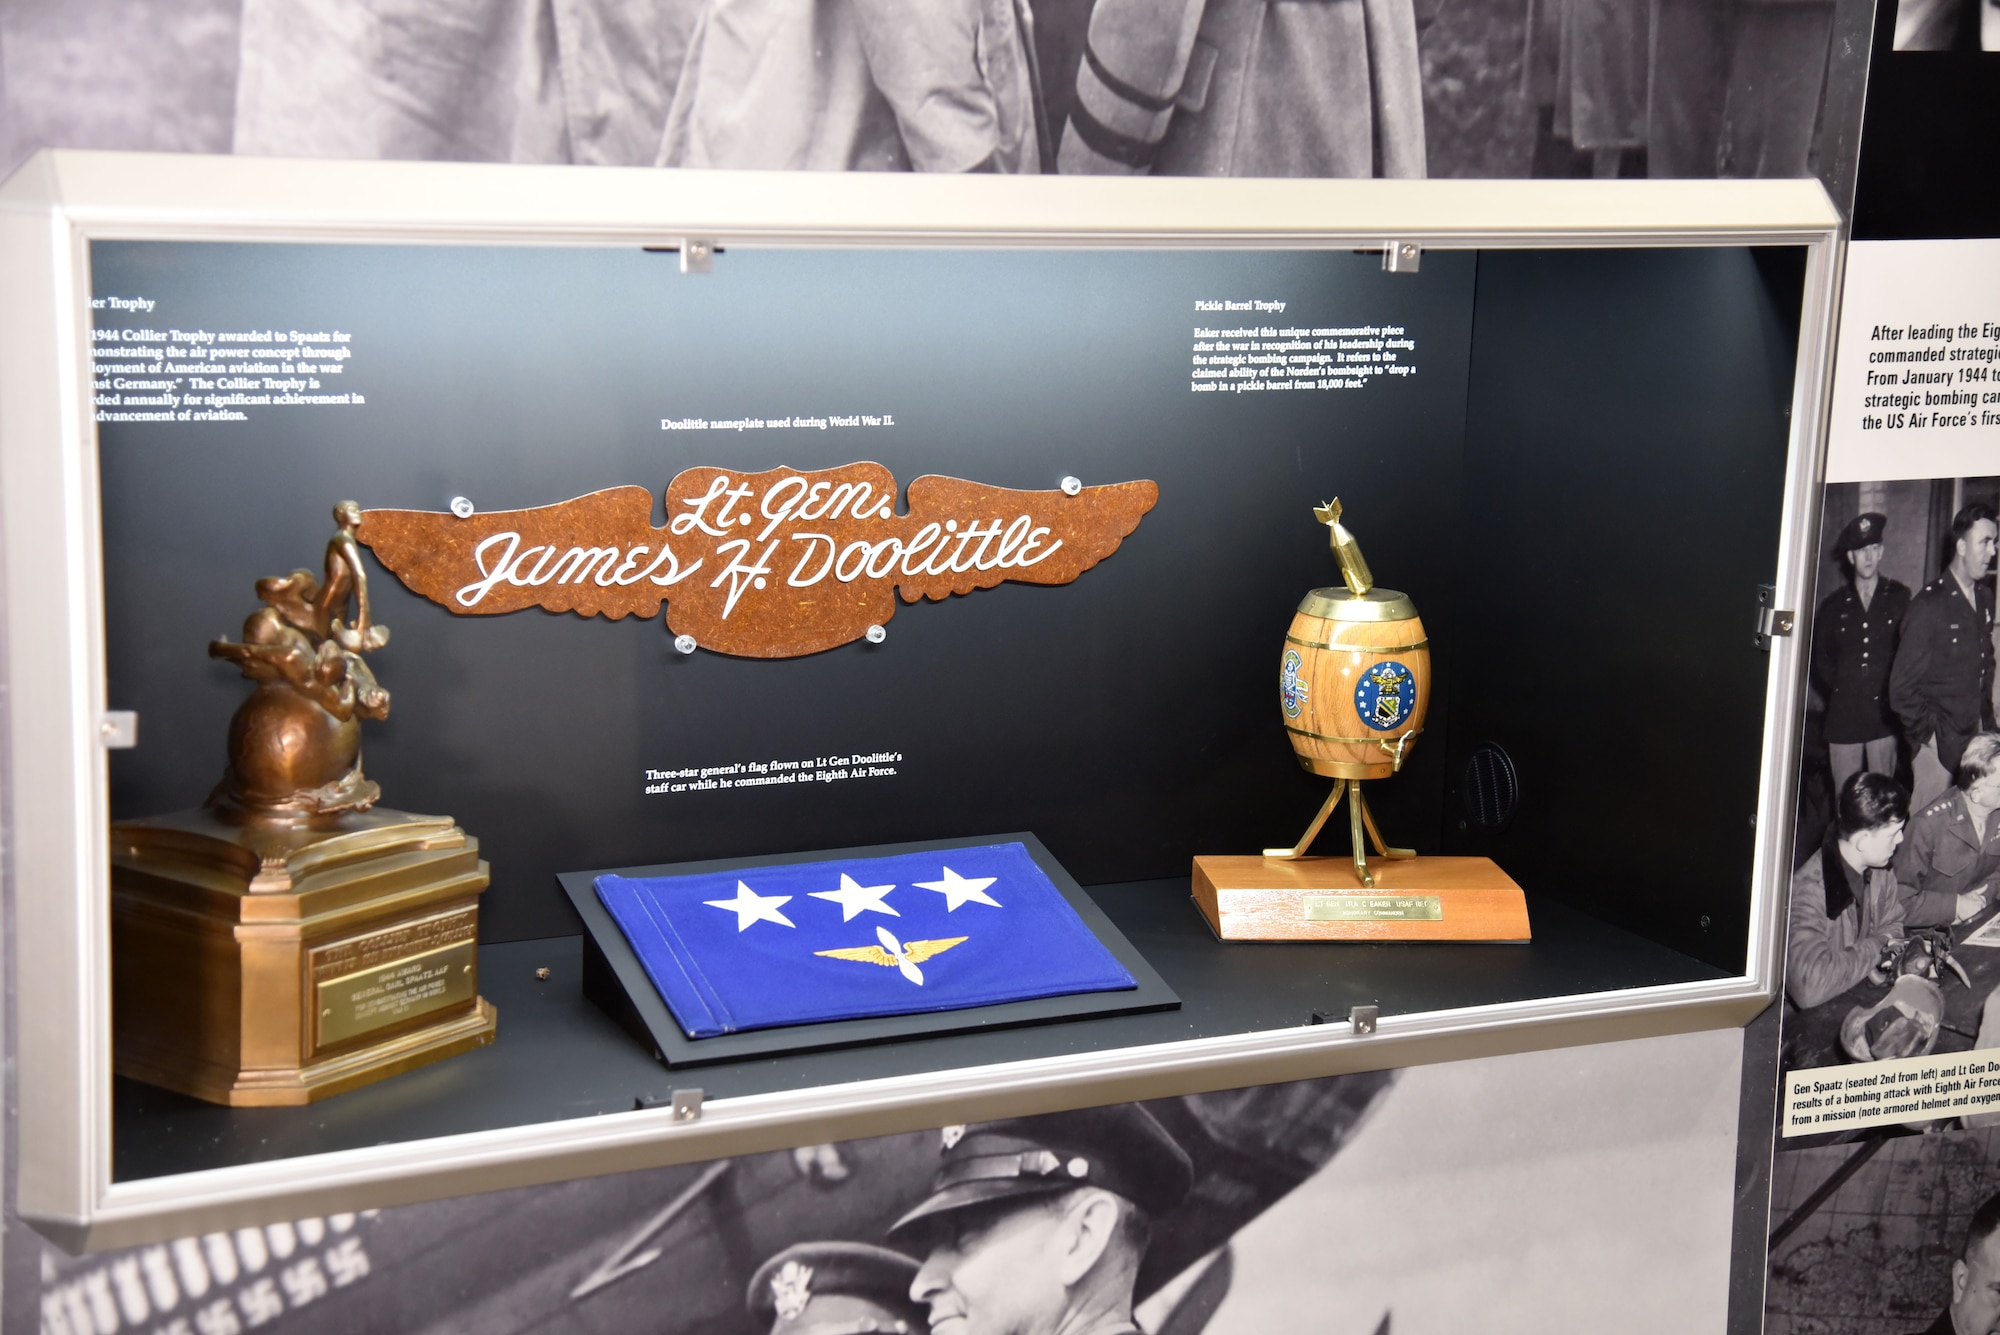 WWII Bombing Campaign Leaders Exhibit case which includes the Pickle Barrel Trophy, Lt. Gen. Doolittle's 3-star flag and name-pate, and the 1944 Collier Trophy on display at the National Museum of the U.S. Air Force. (U.S. Air Force photo)